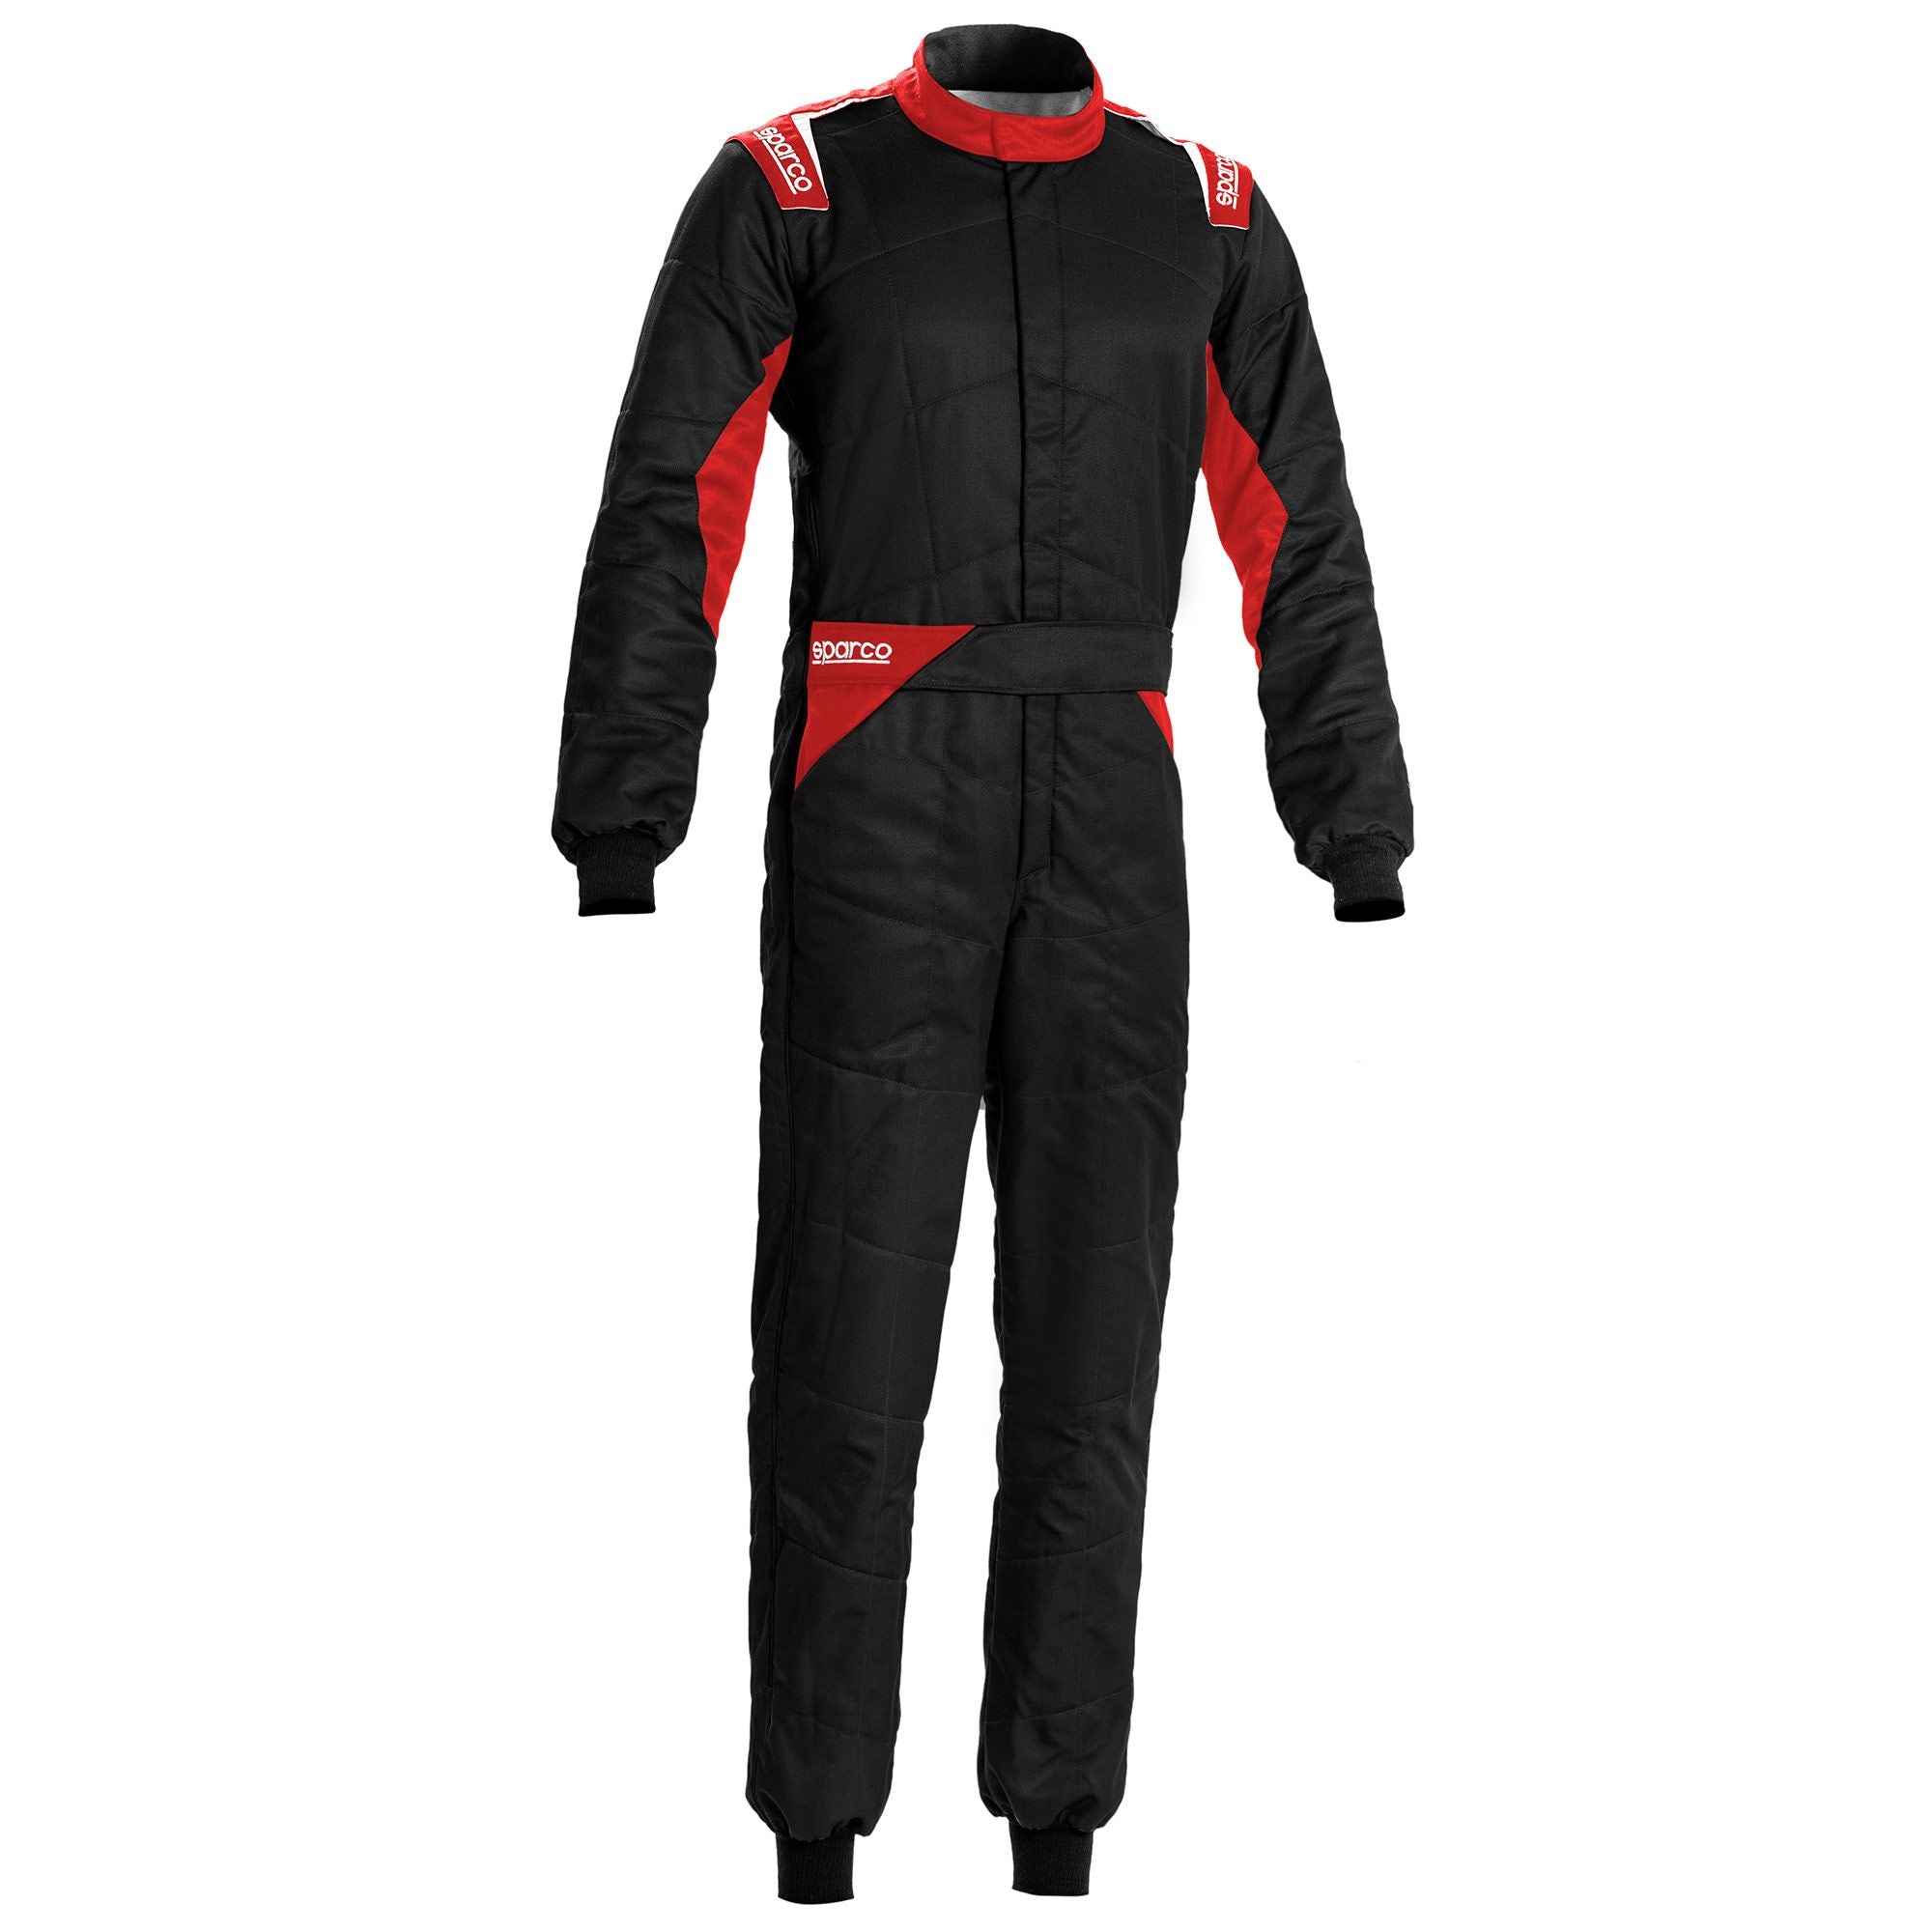 SPARCO 00109348NRRS SPRINT 2022 Racing suit, FIA 8856-2018, black/red, size 48 Photo-0 